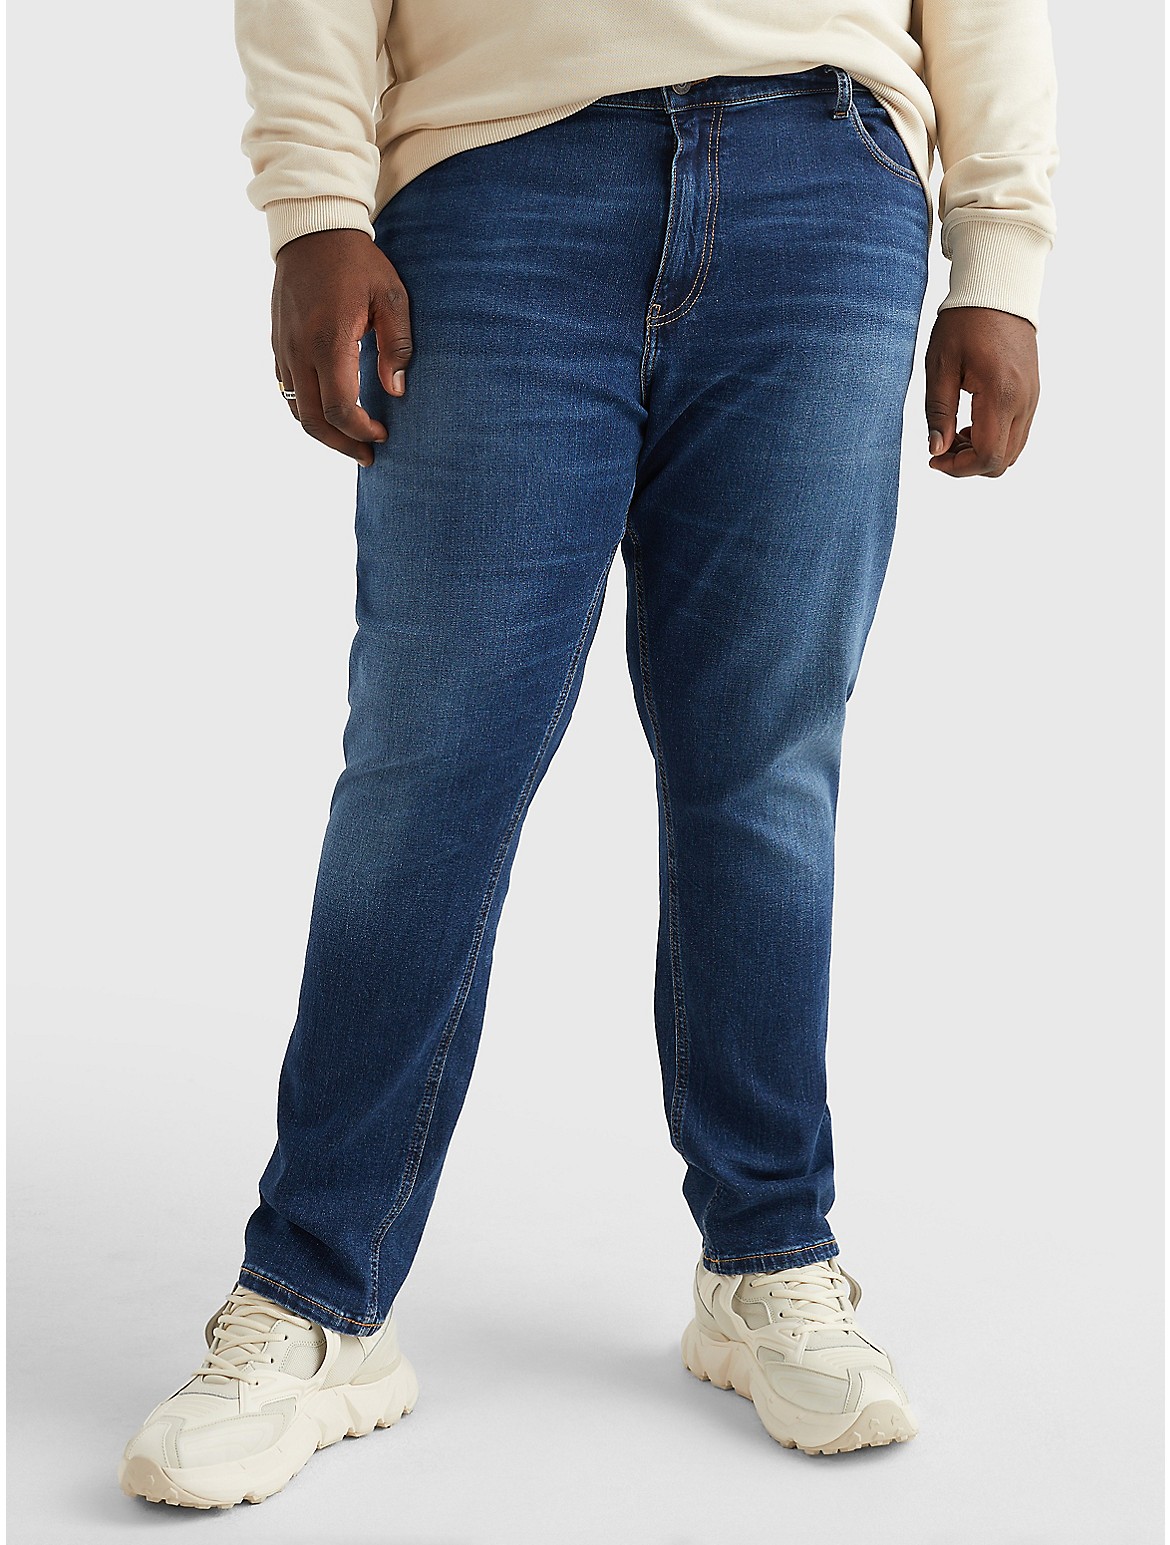 Tommy Hilfiger Men's Big and Tall Mid Rise Straight Fit Jean